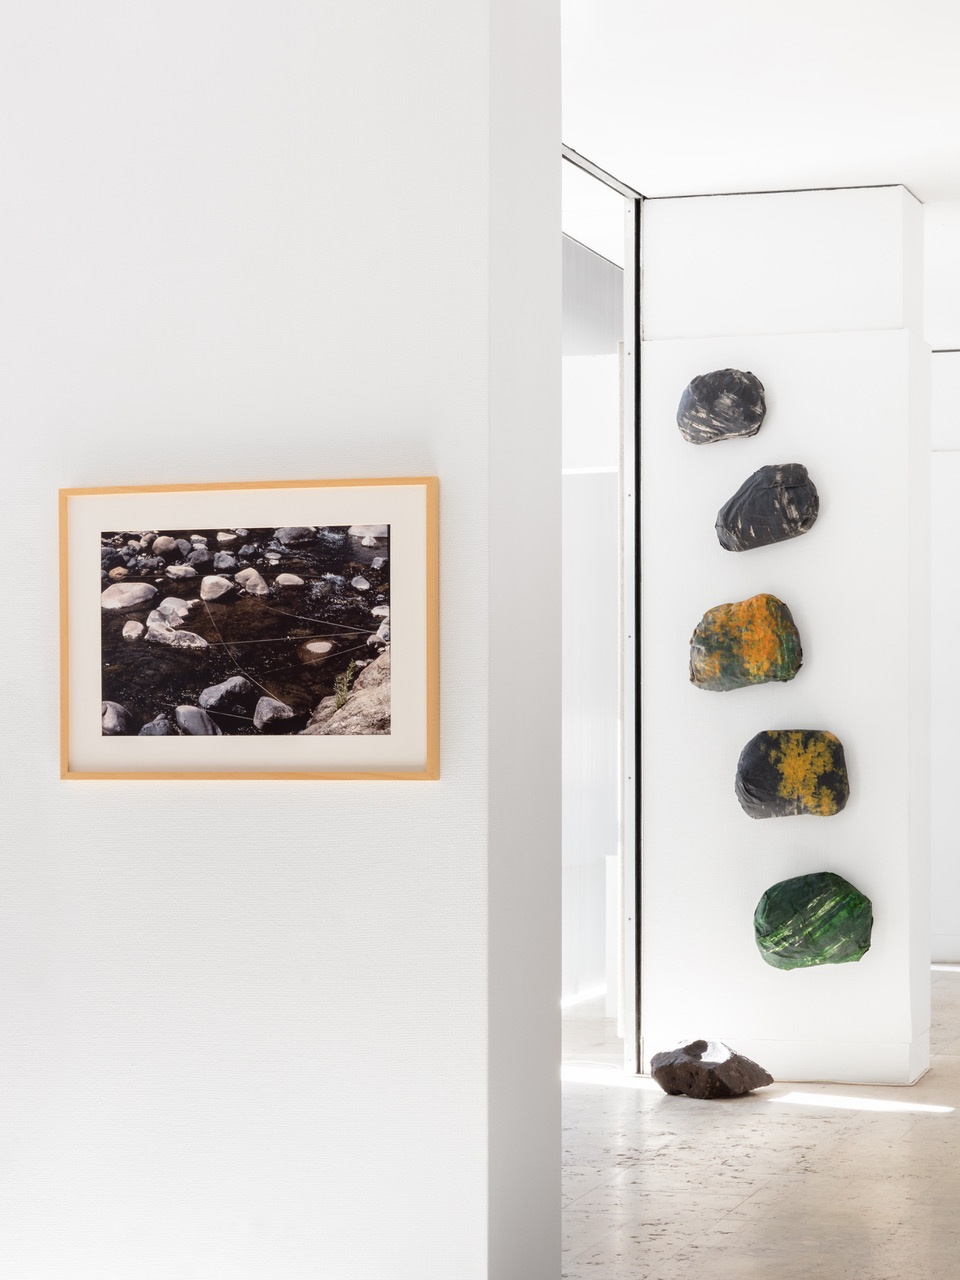 “Earthkeeping, Earthshaking - art, feminisms and ecology,” Galeria Quadrum, 2020, installation view